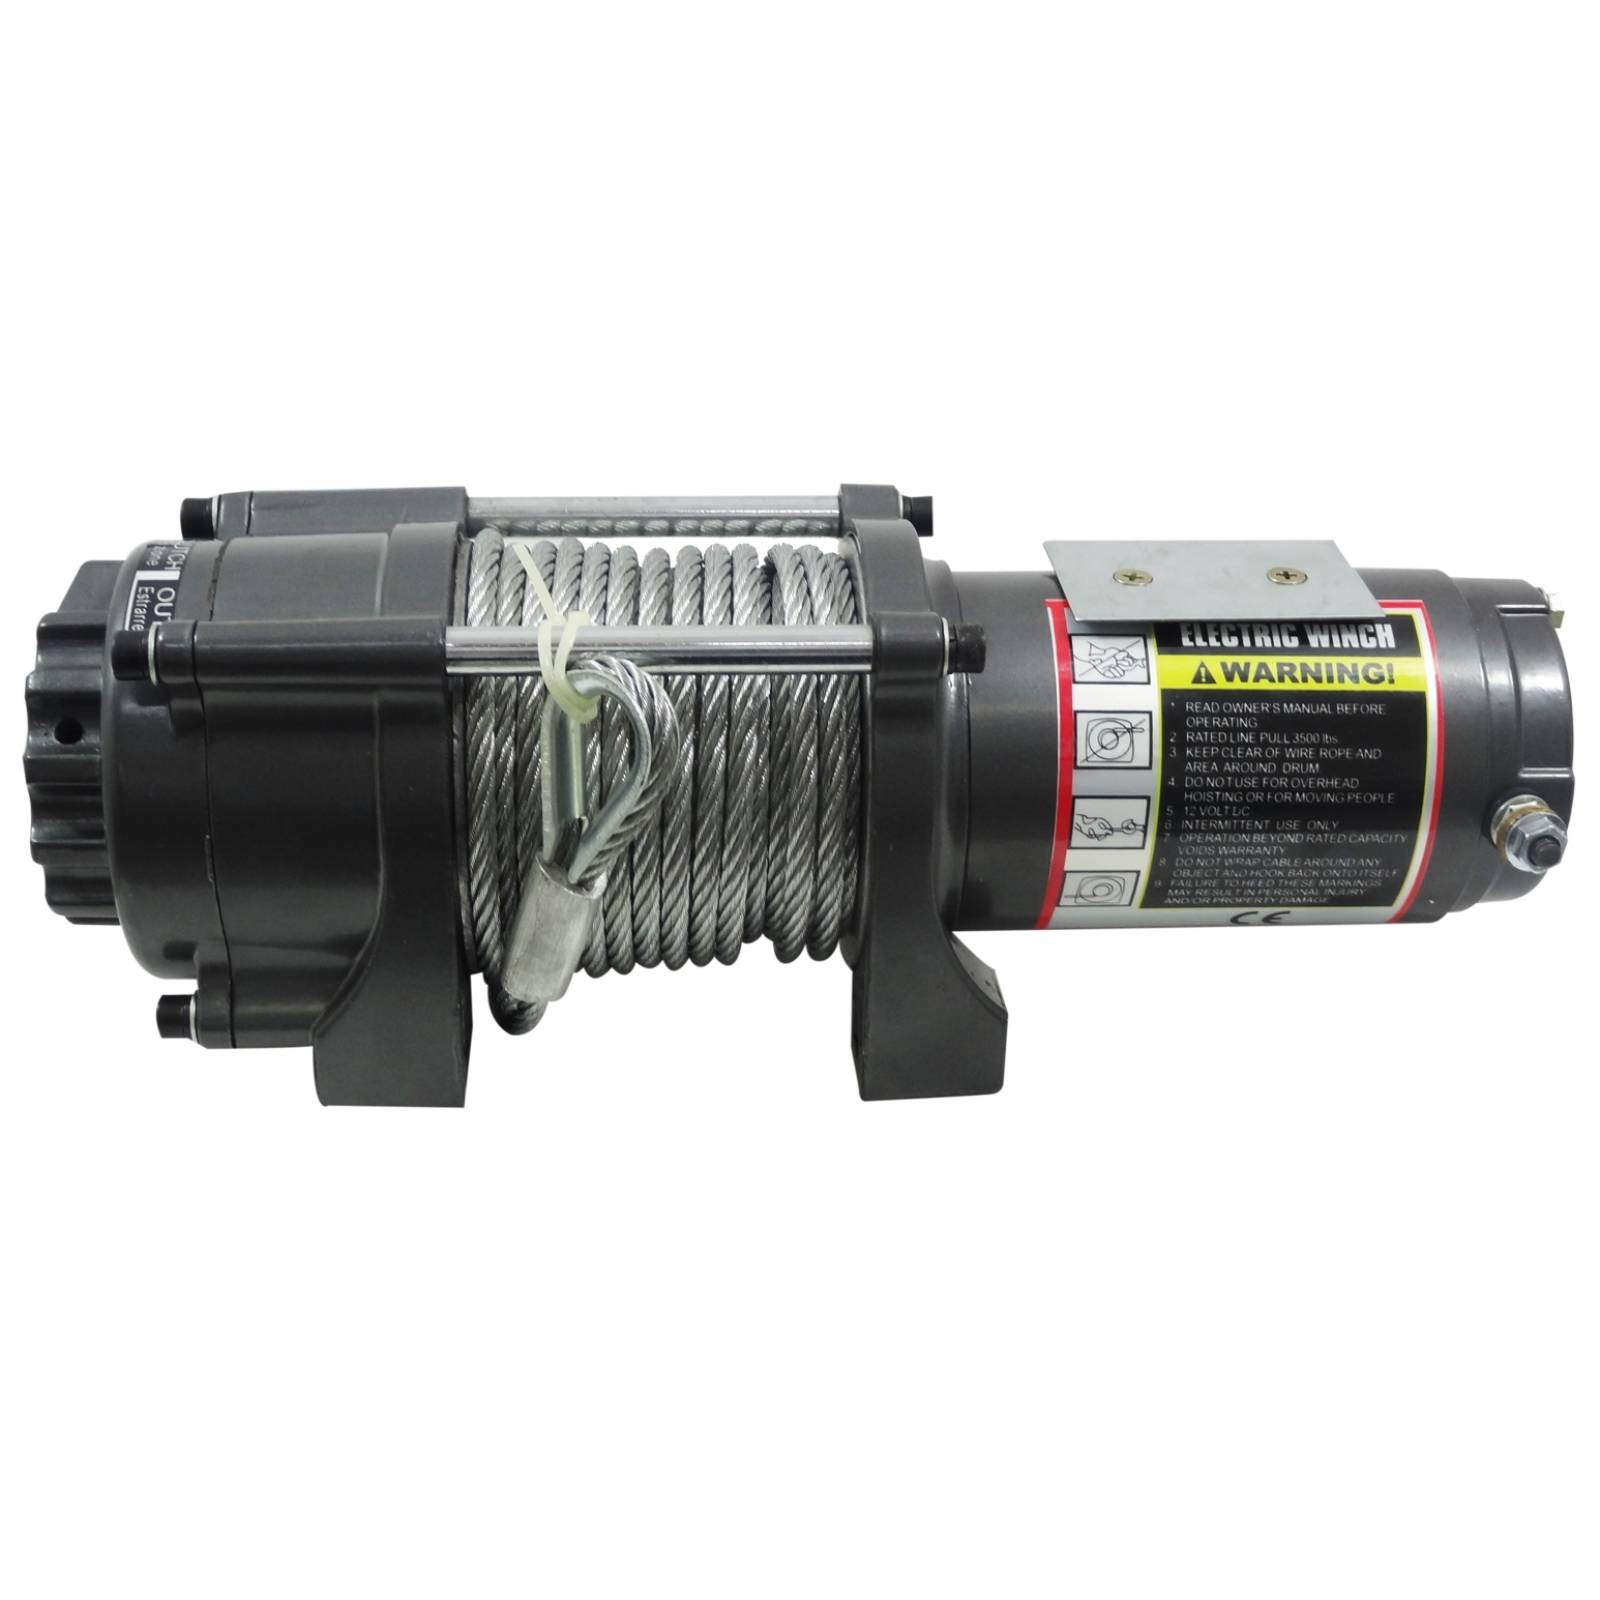 Malacate Winch 12V 3500 Lbs y Cable 13 m 1,60 T 6 MM